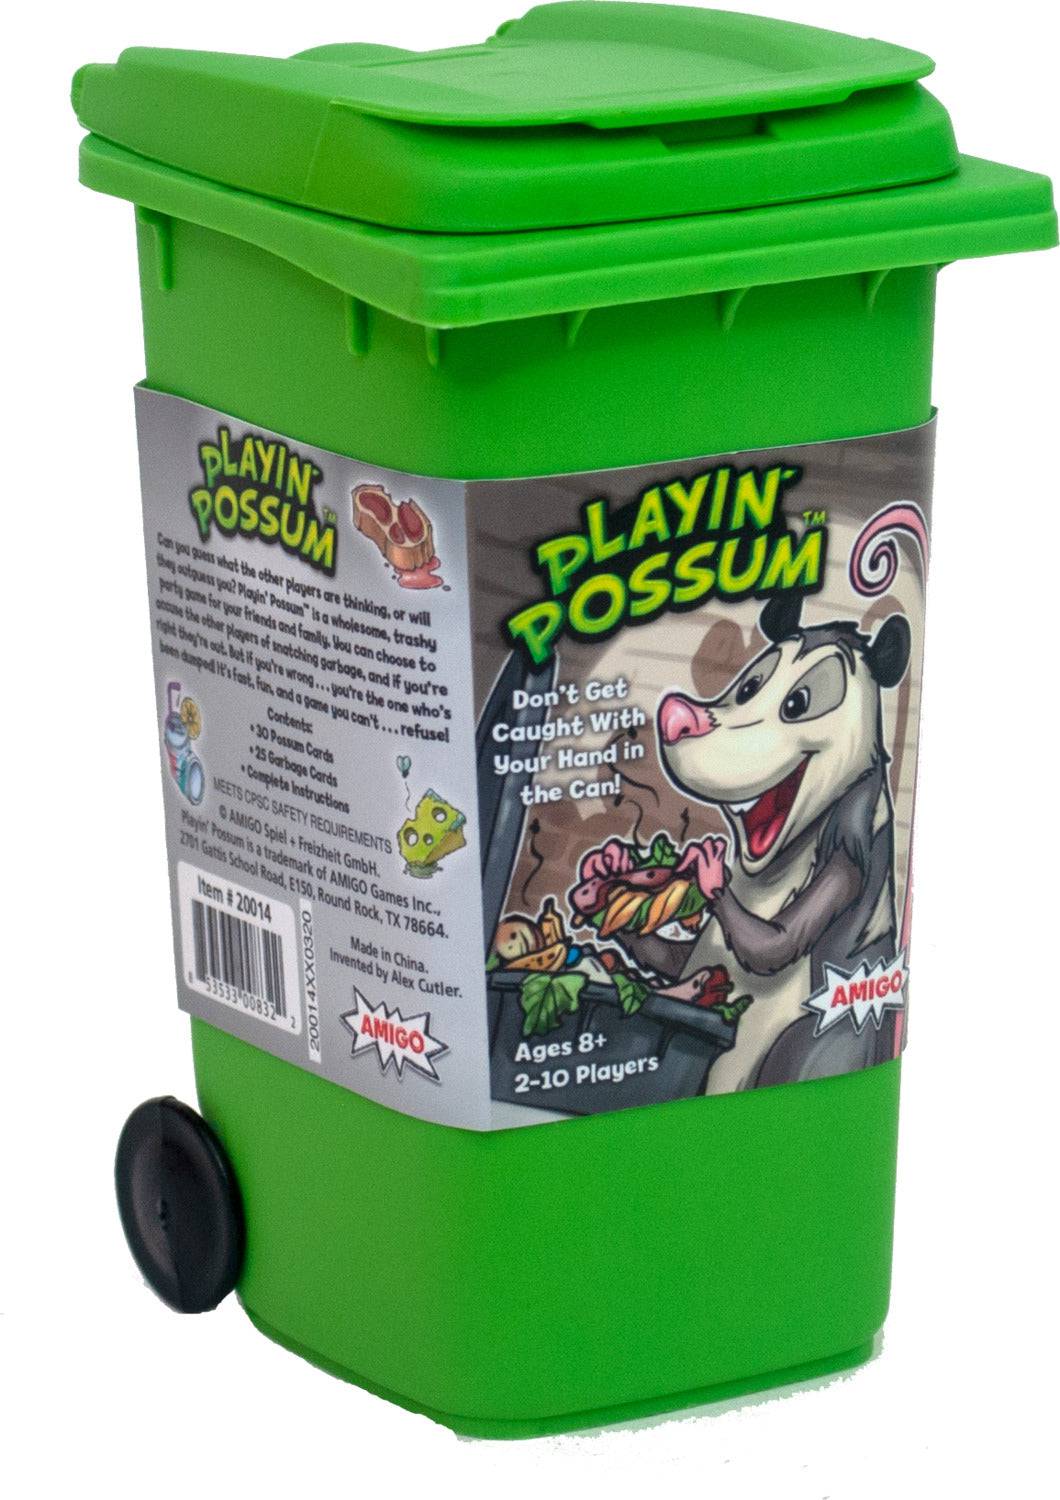 Playing Possum Game - A Child's Delight